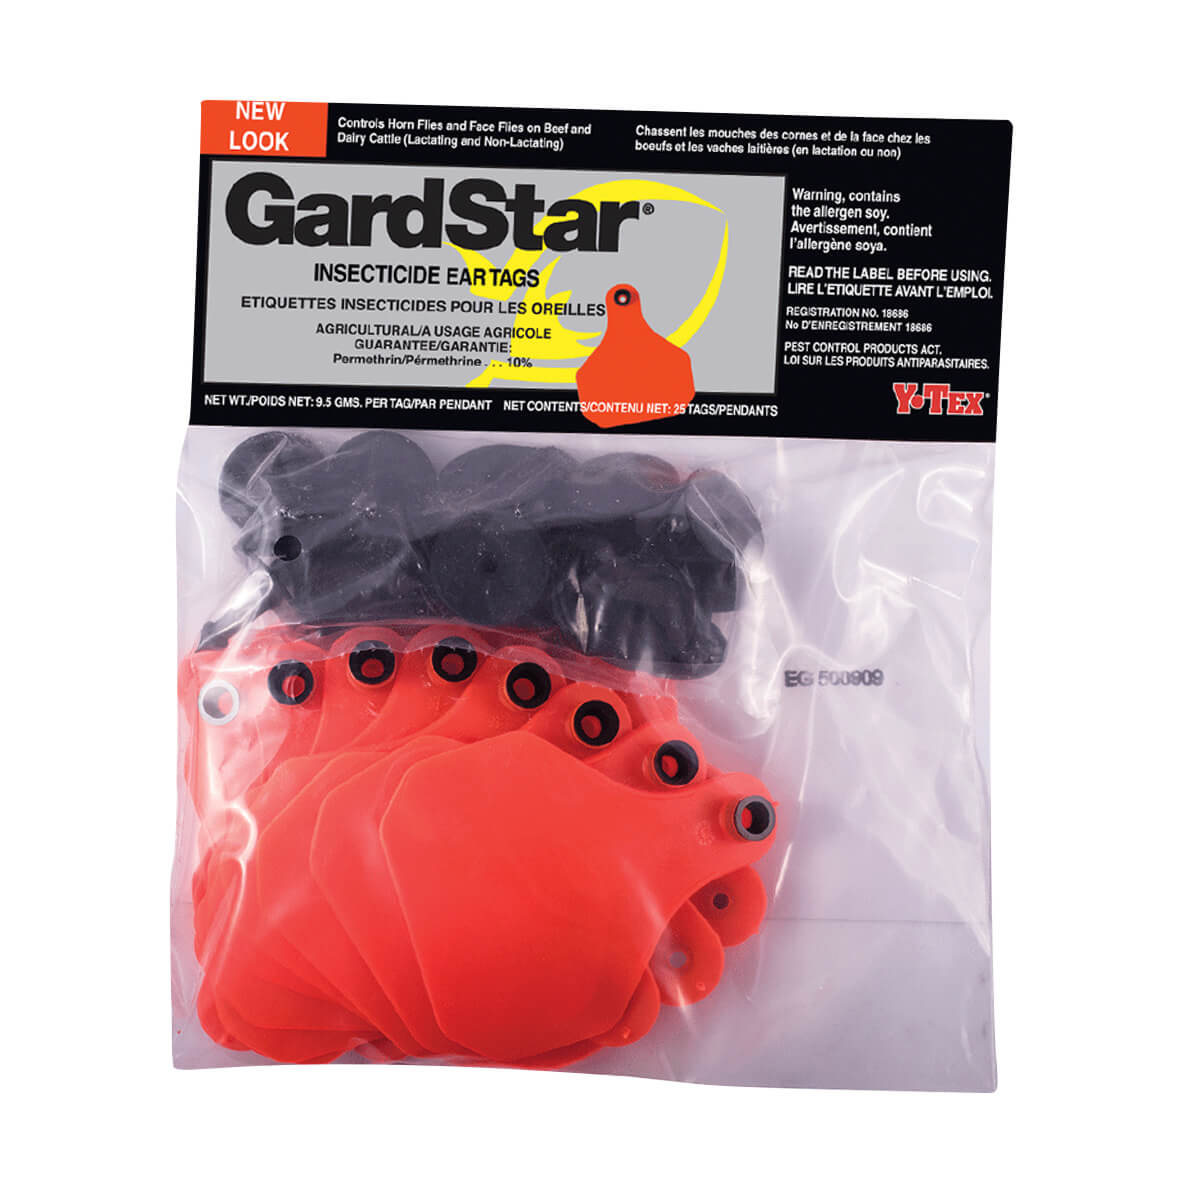 GardStar Insecticide Ear Tags